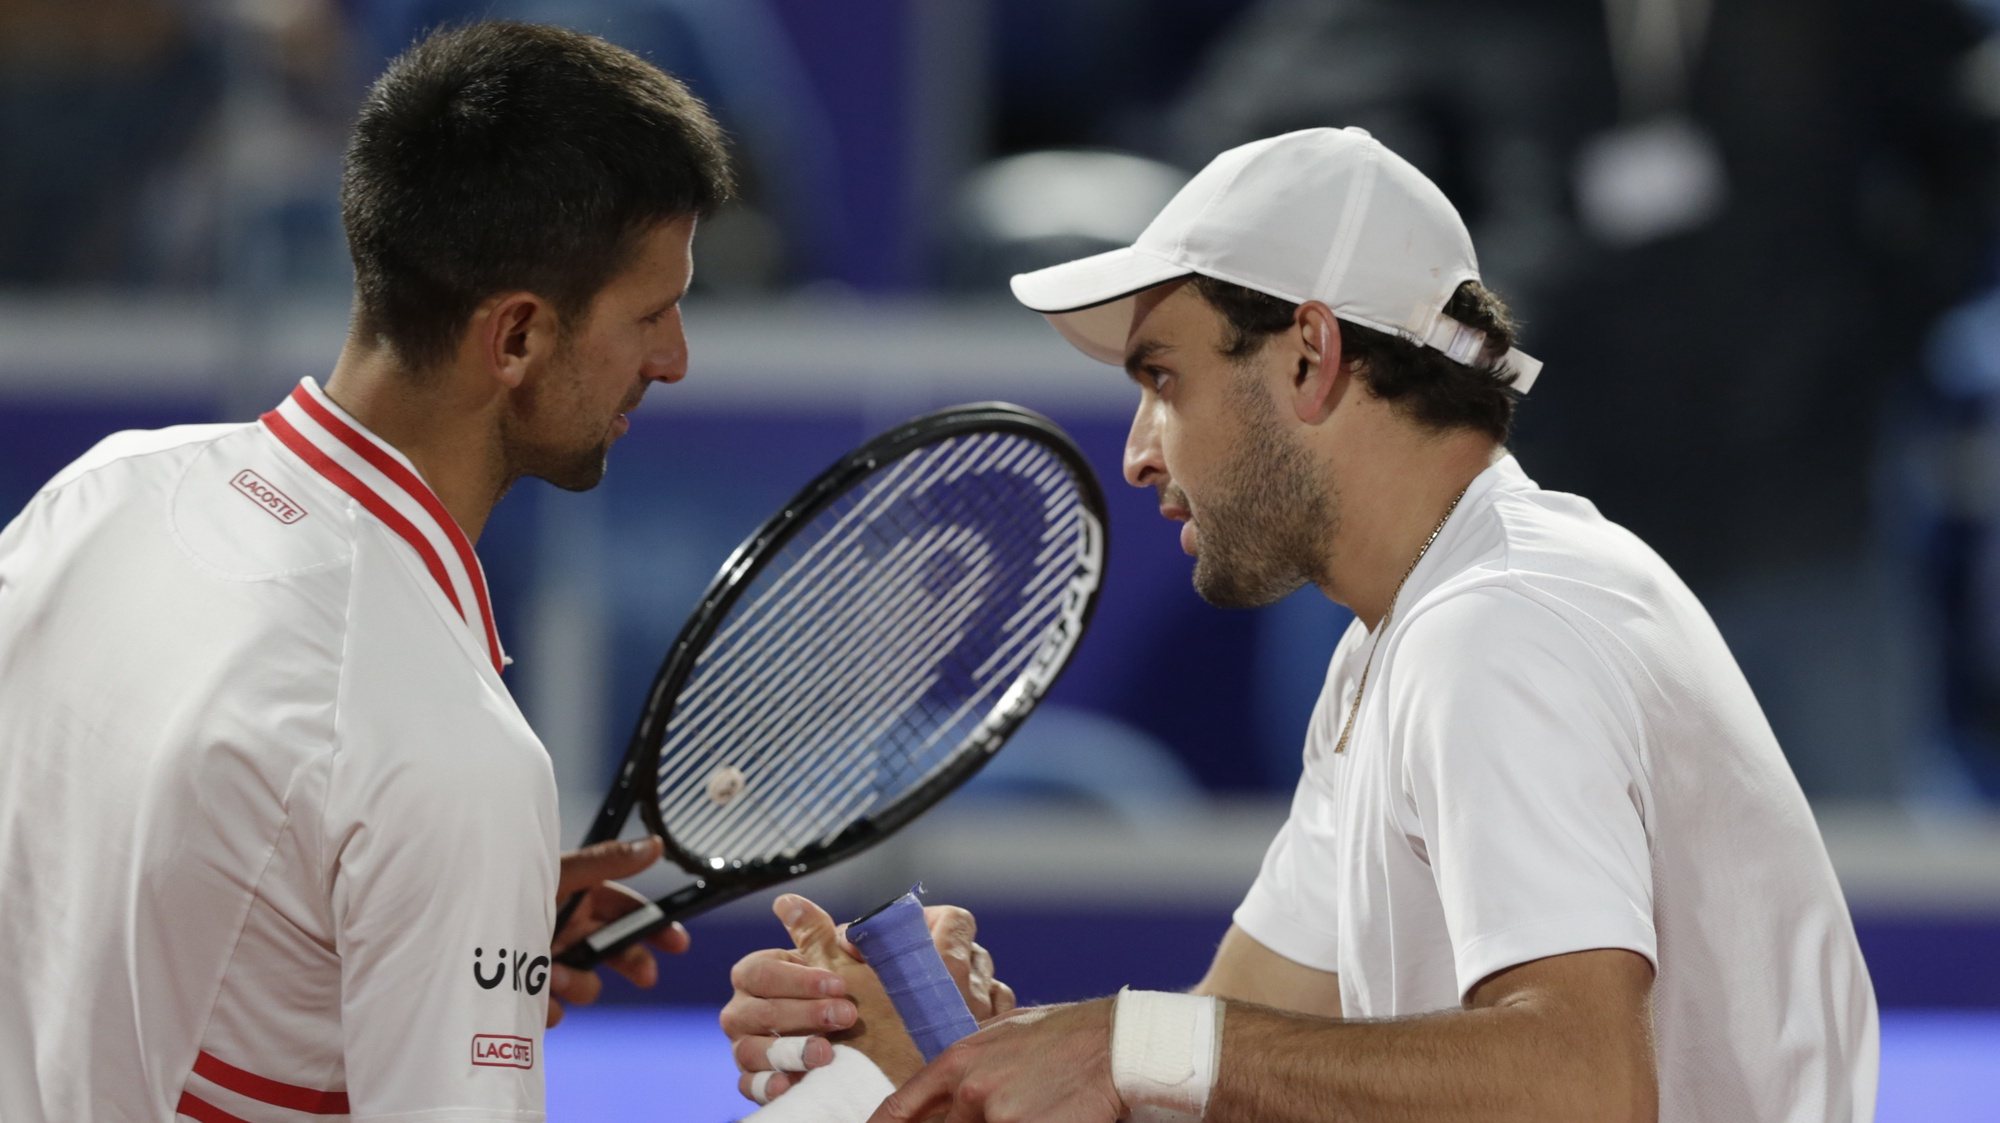 epa09157385 Aslan Karatsev of Russia (R) shakes hands with Novak Djokovic of Serbia after their semi final match at the Serbia Open tennis tournament in Belgrade, Serbia, 24 April 2021.  EPA/ANDREJ CUKIC